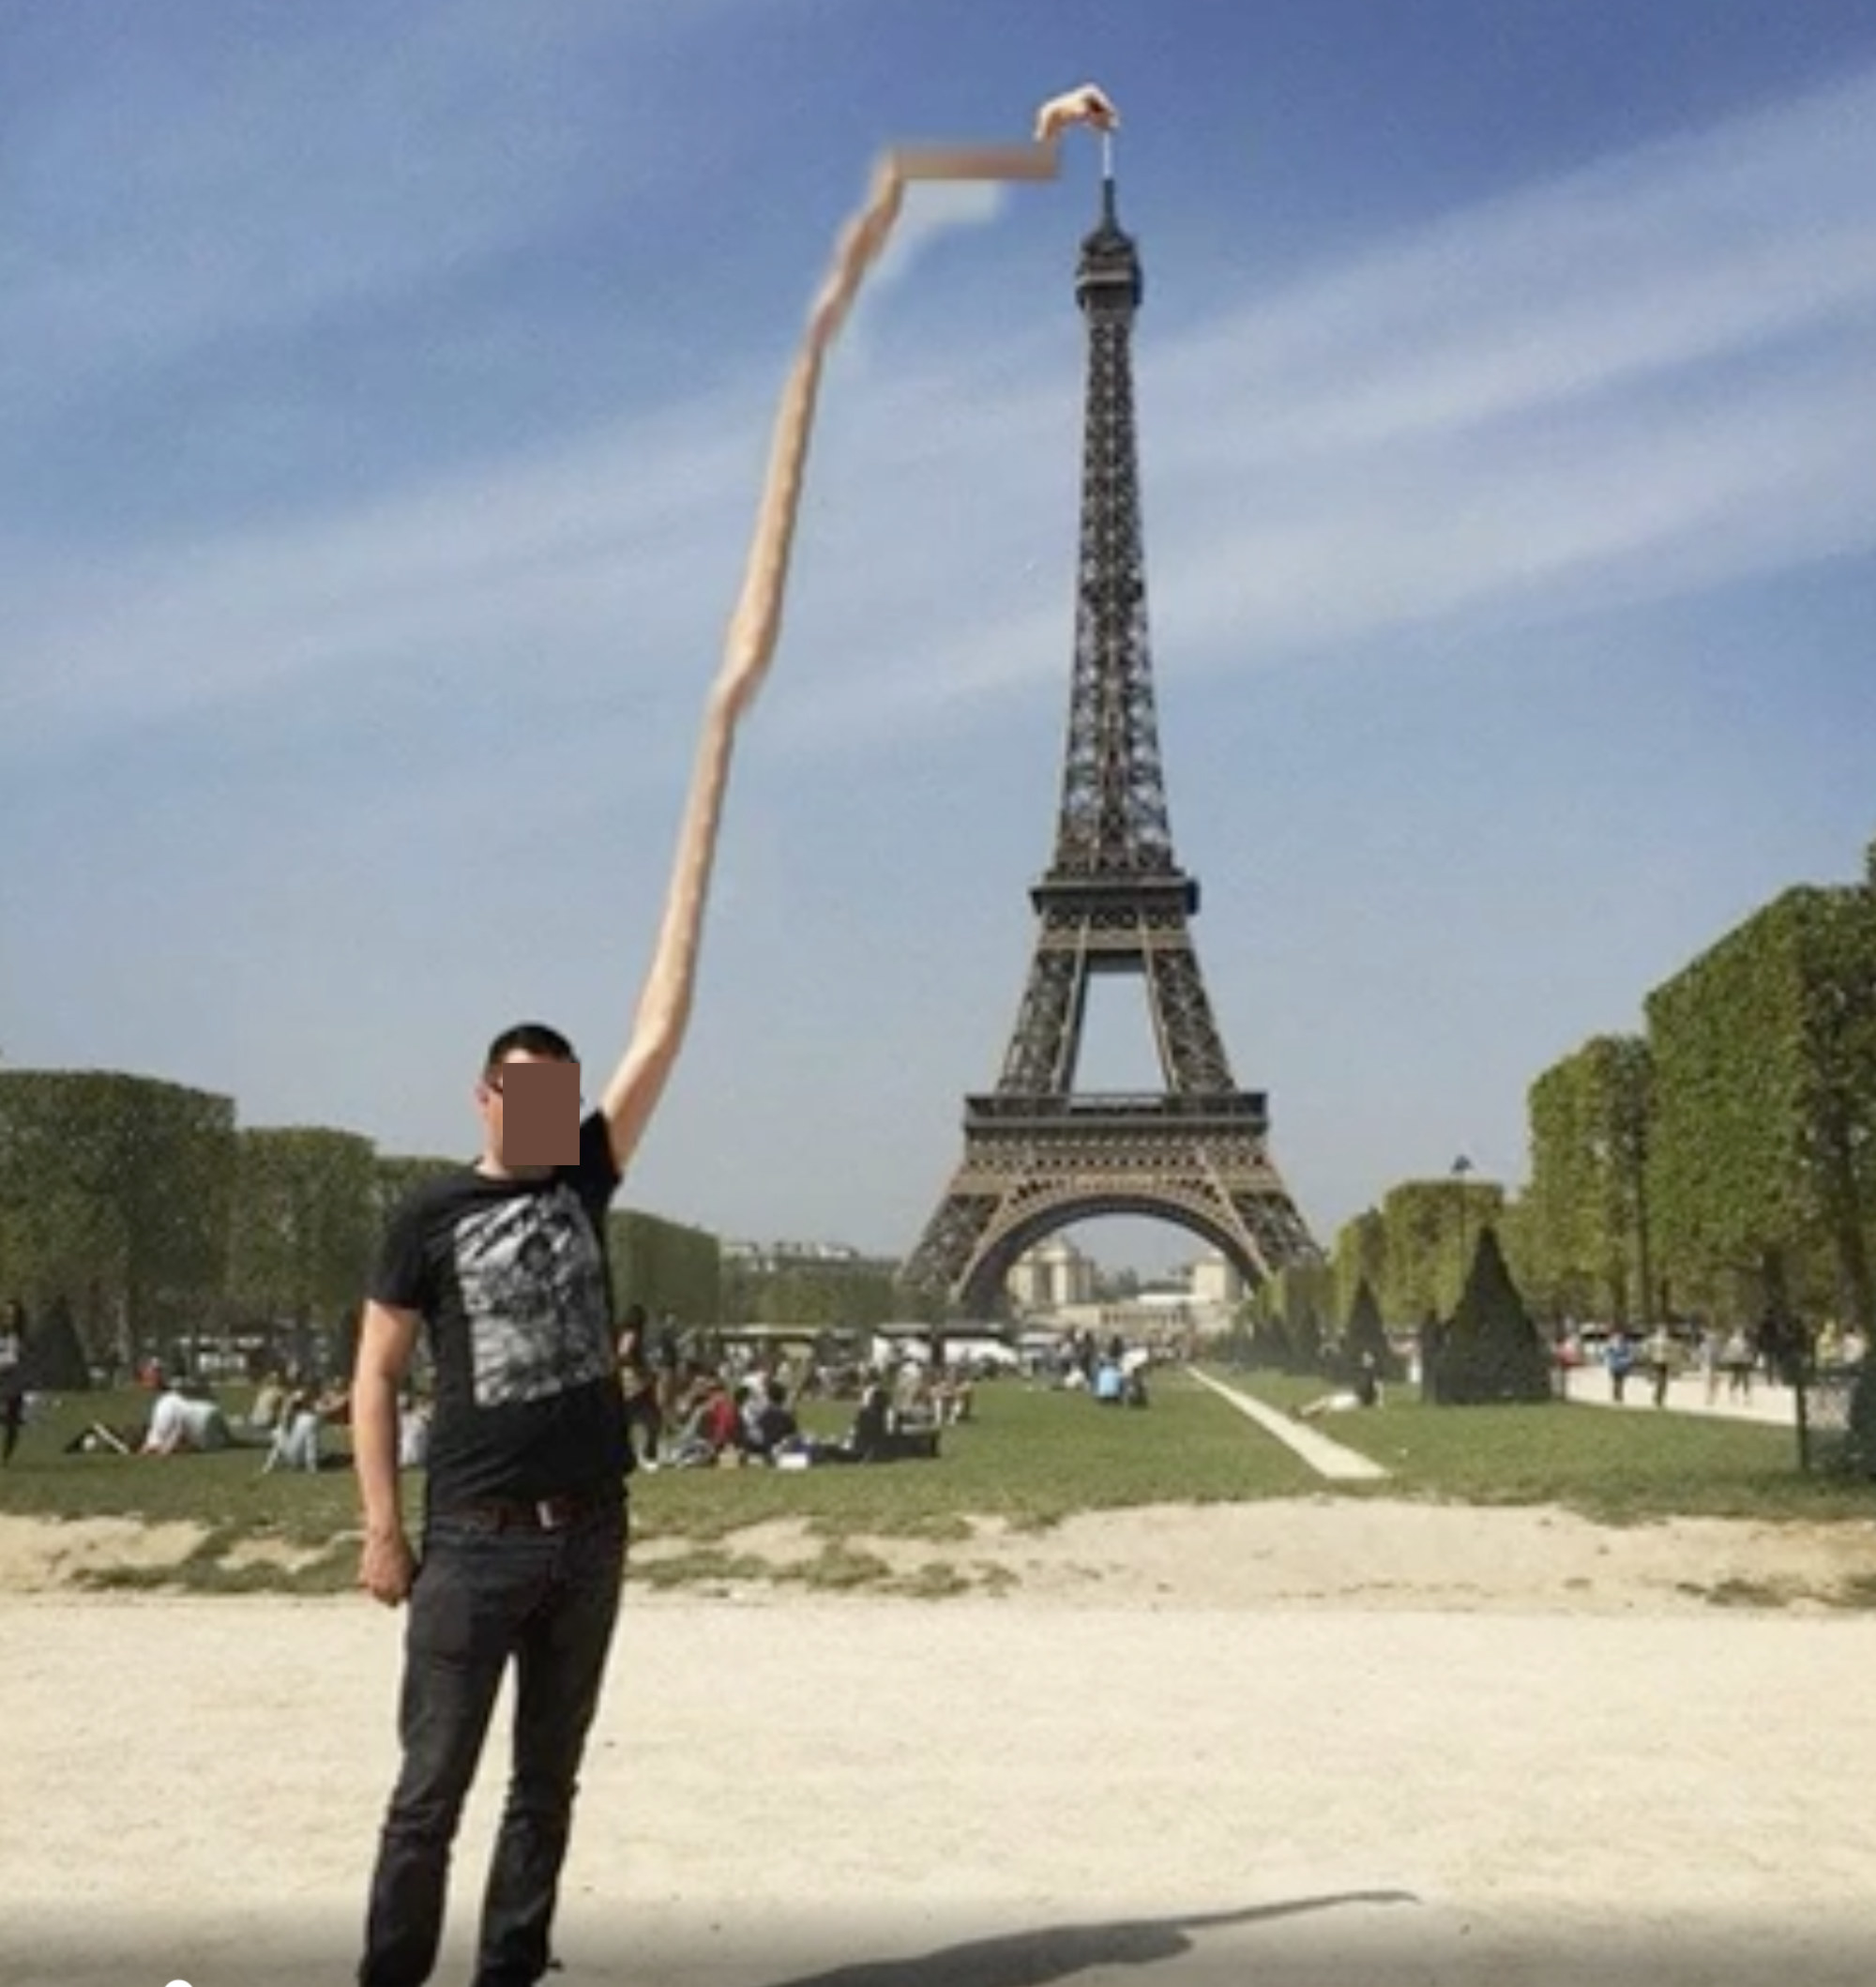 A Photoshopped image of a man in front of the Eiffel Tower